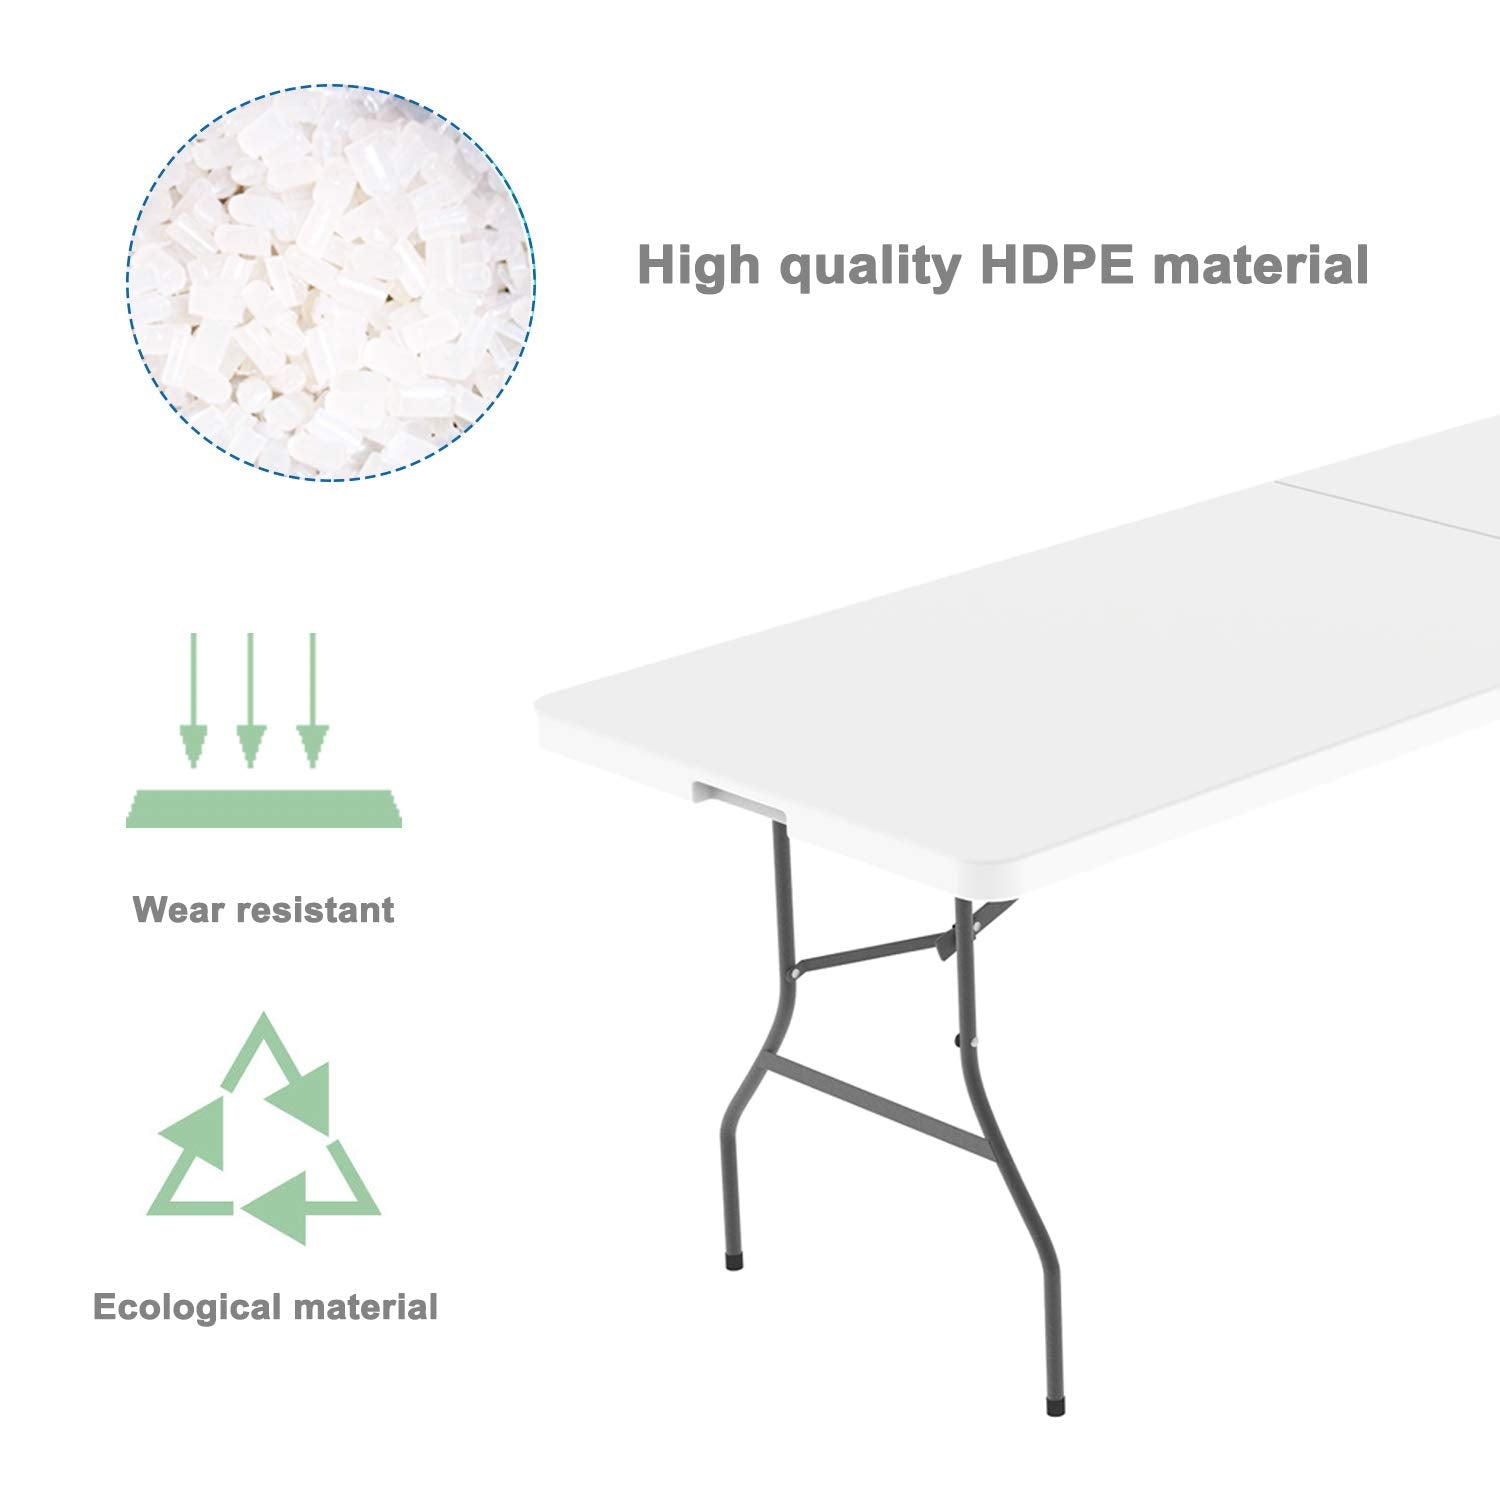 Transportable-Folding-Table-180-x-74-cm-Robust-Plastic-Table-White-Foldable-in-half-Material-HDPE